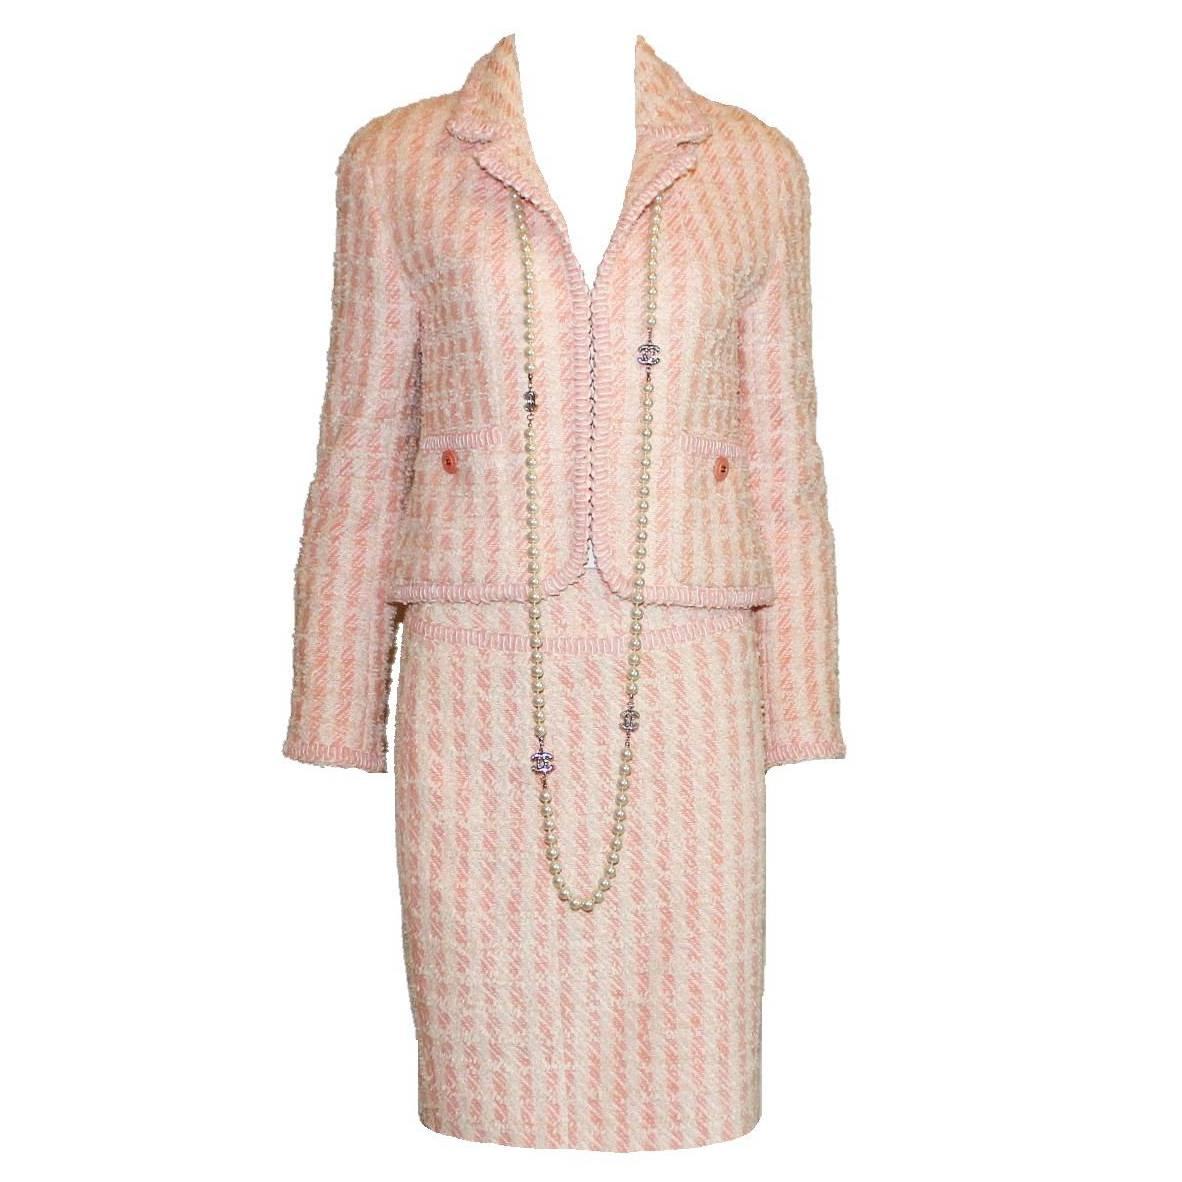 Iconic Chanel 1994 Pink Pastels Skirt Suit - Museum Piece